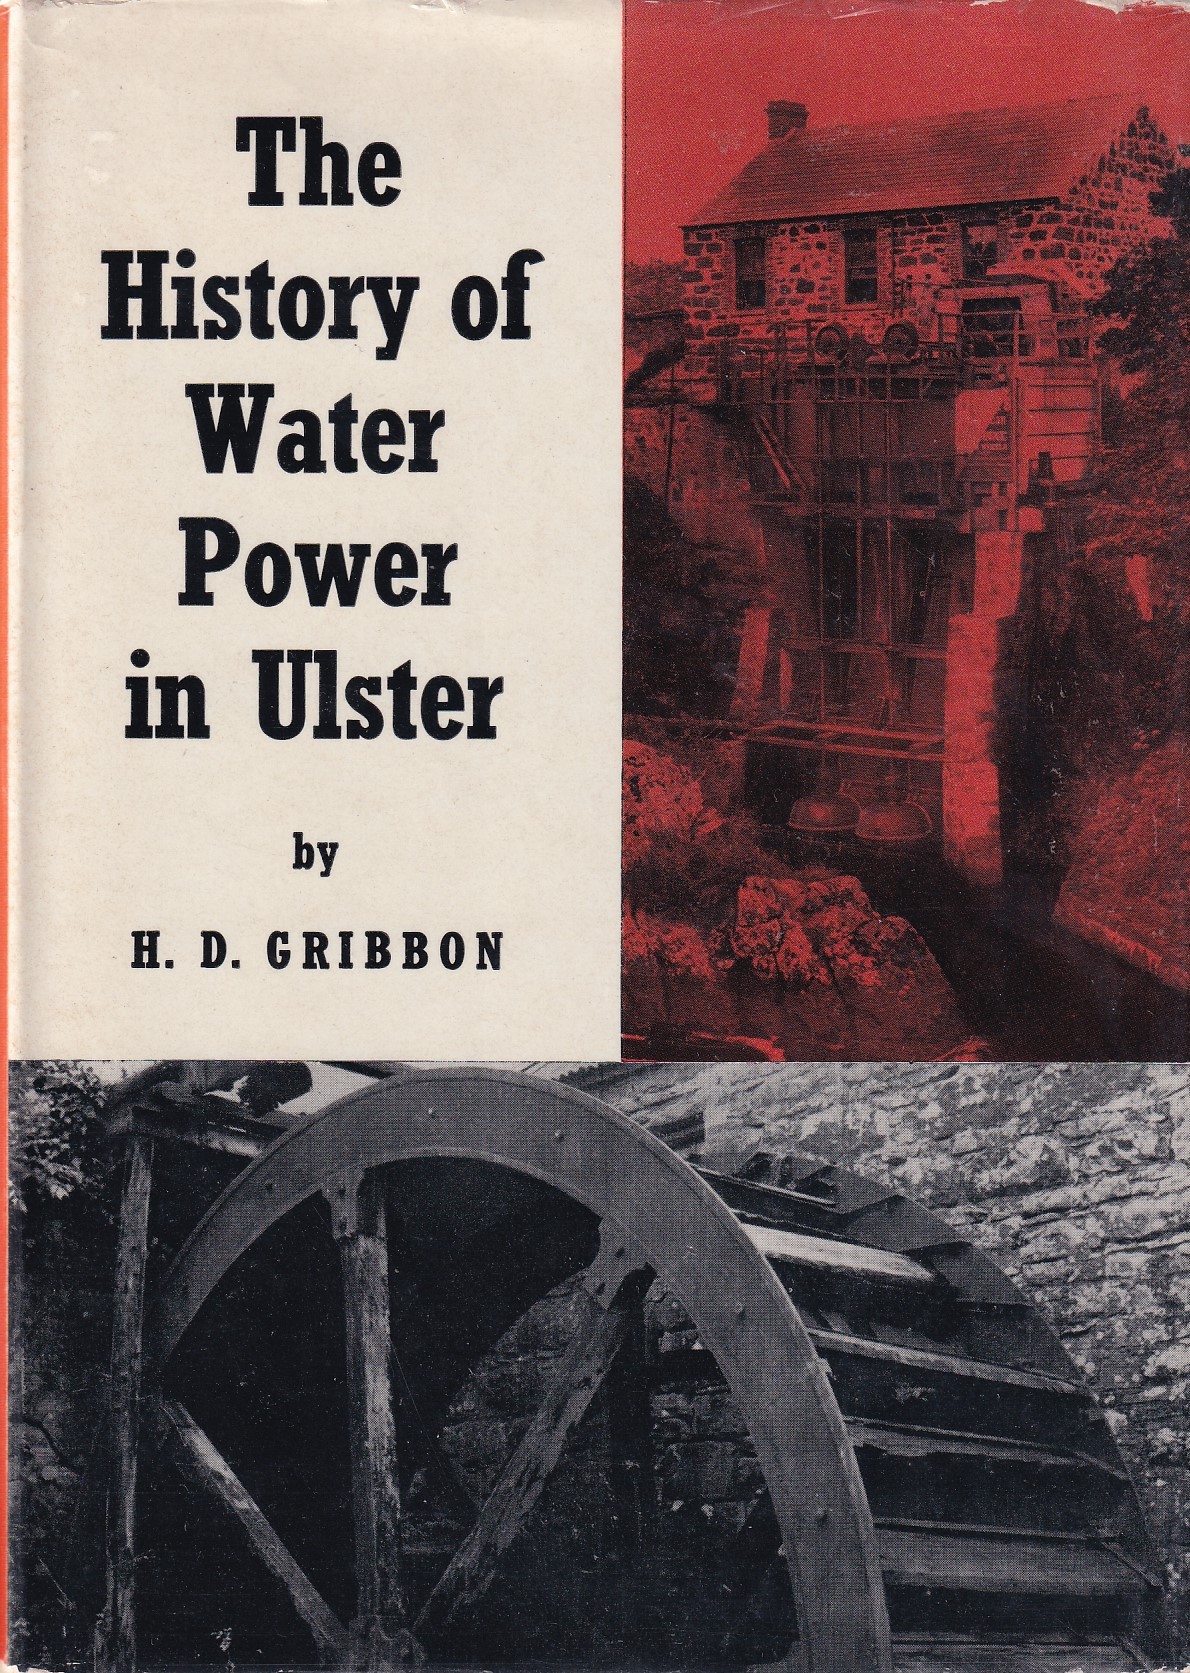 The History of Water Power in Ulster | H. D. Gribbon | Charlie Byrne's